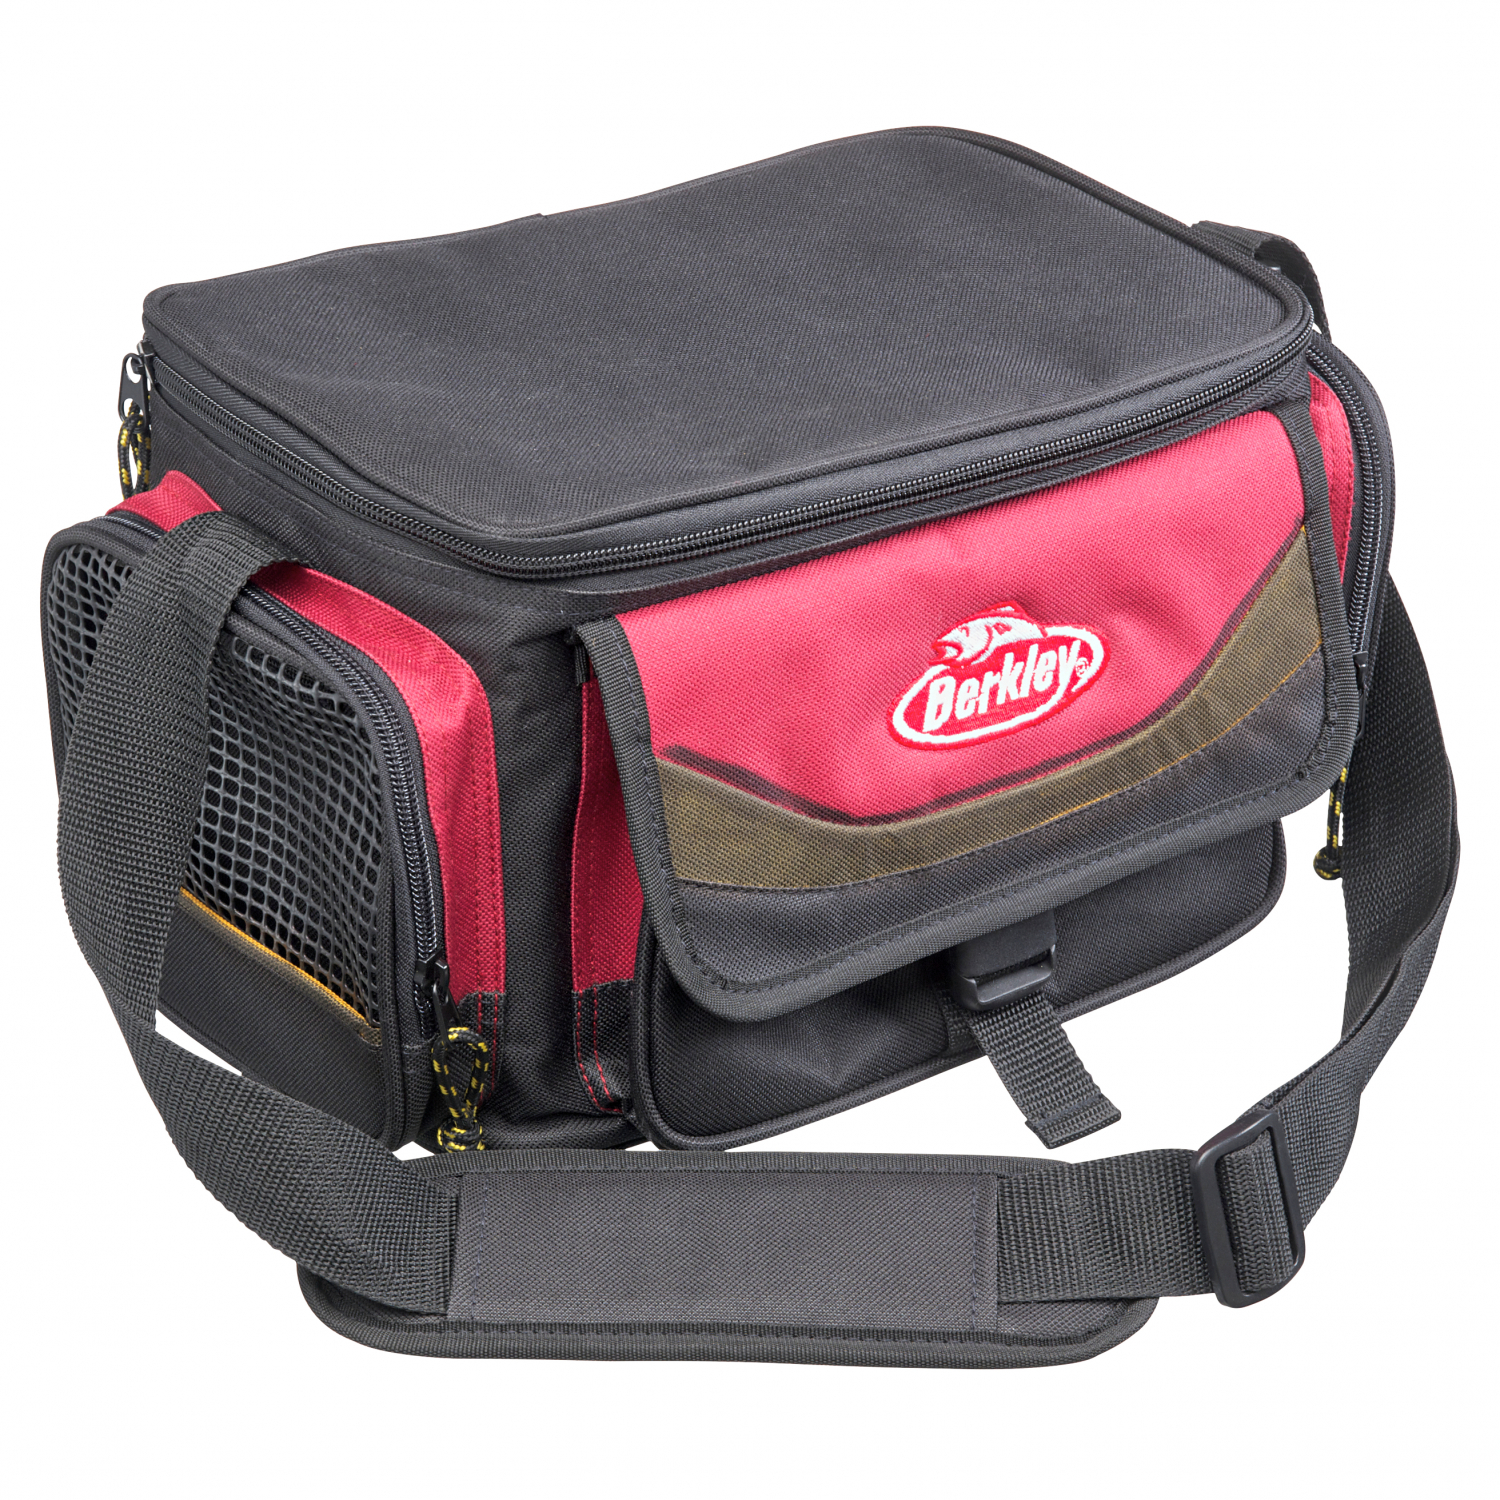 Berkley Bag with Bait Box (red) at low prices